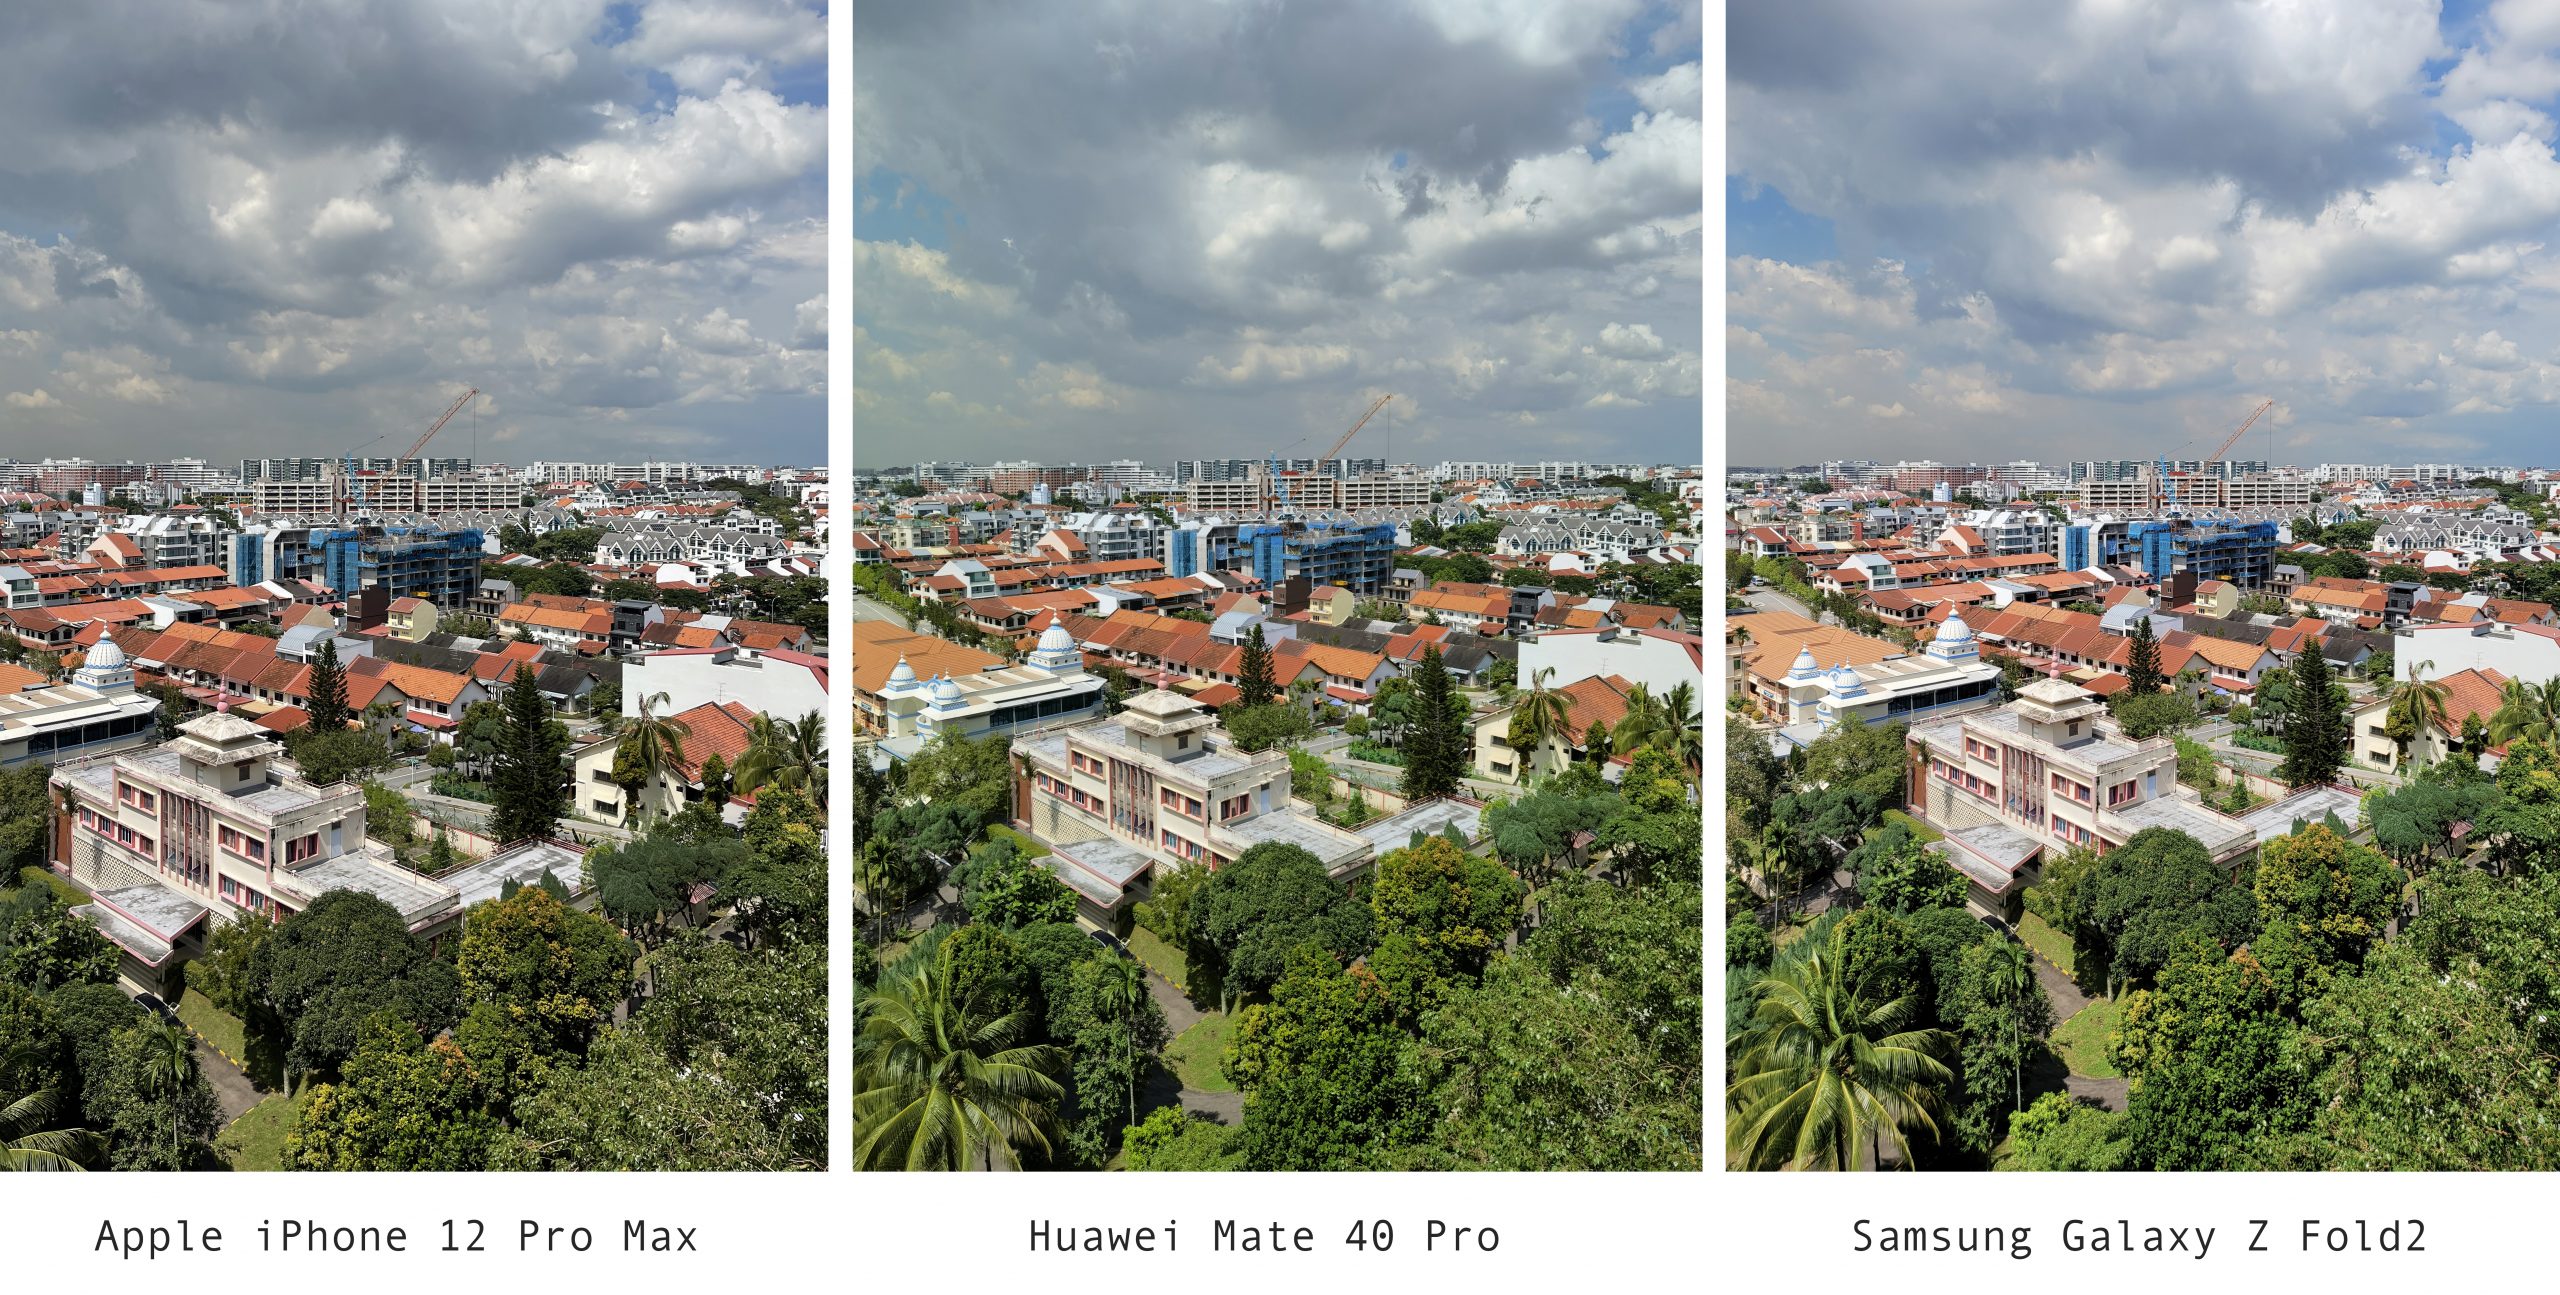 A Comparison Of Photos Taken With Apple Iphone 12 Pro Max Vs Huawei Mate 40 Pro Vs Samsung Galaxy Z Fold2